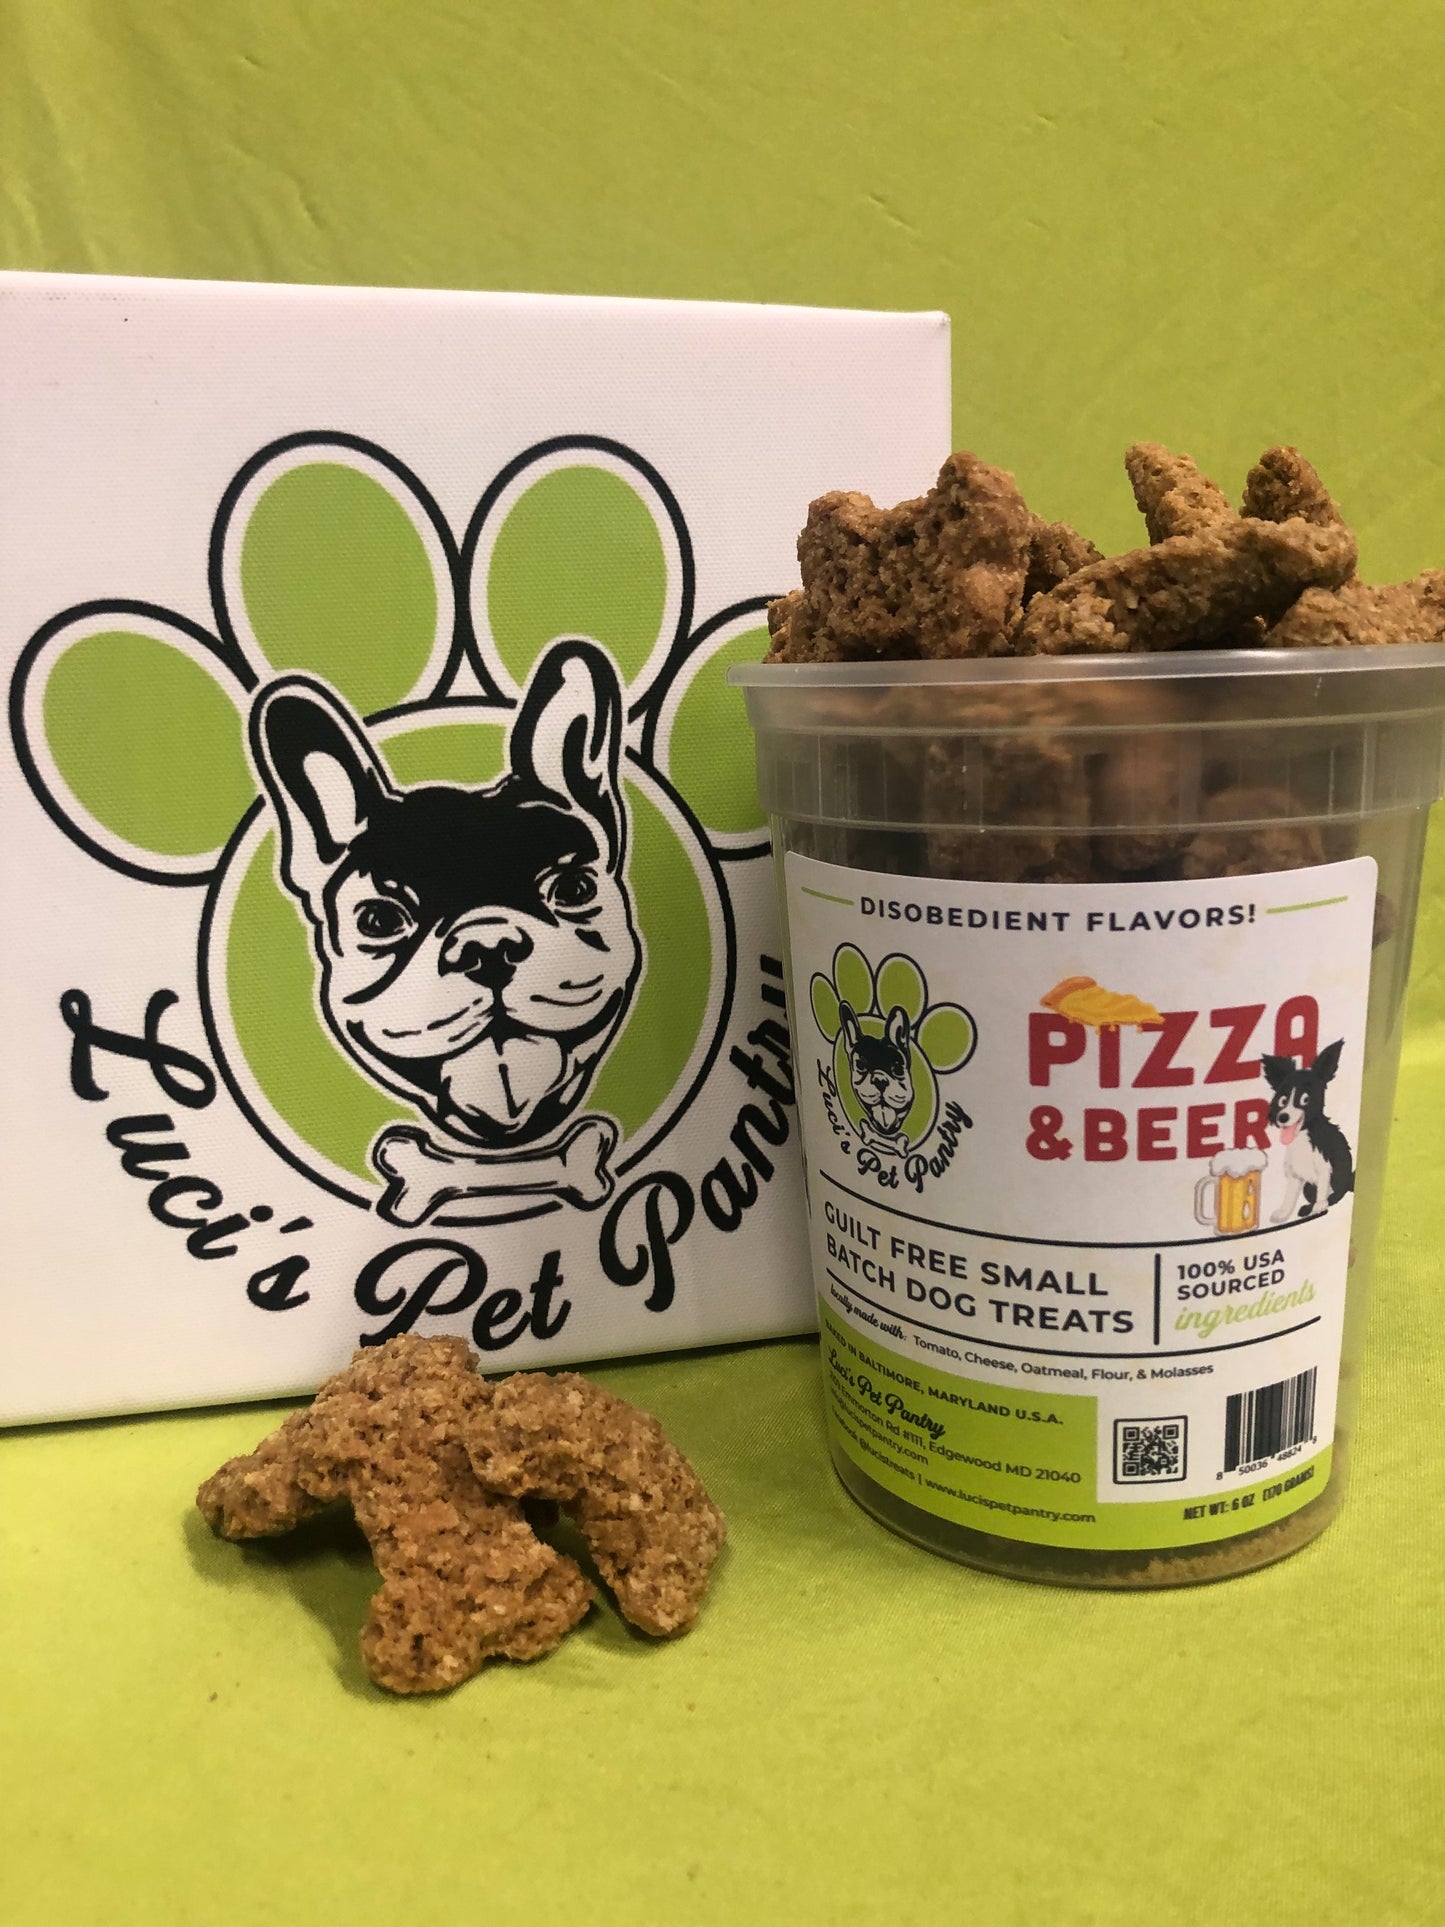 Pizza & Beer - All Natural "Tomato, Cheese, & Beer Grains" Dog & Puppy Treats - Disobedient Tub of Biscuits